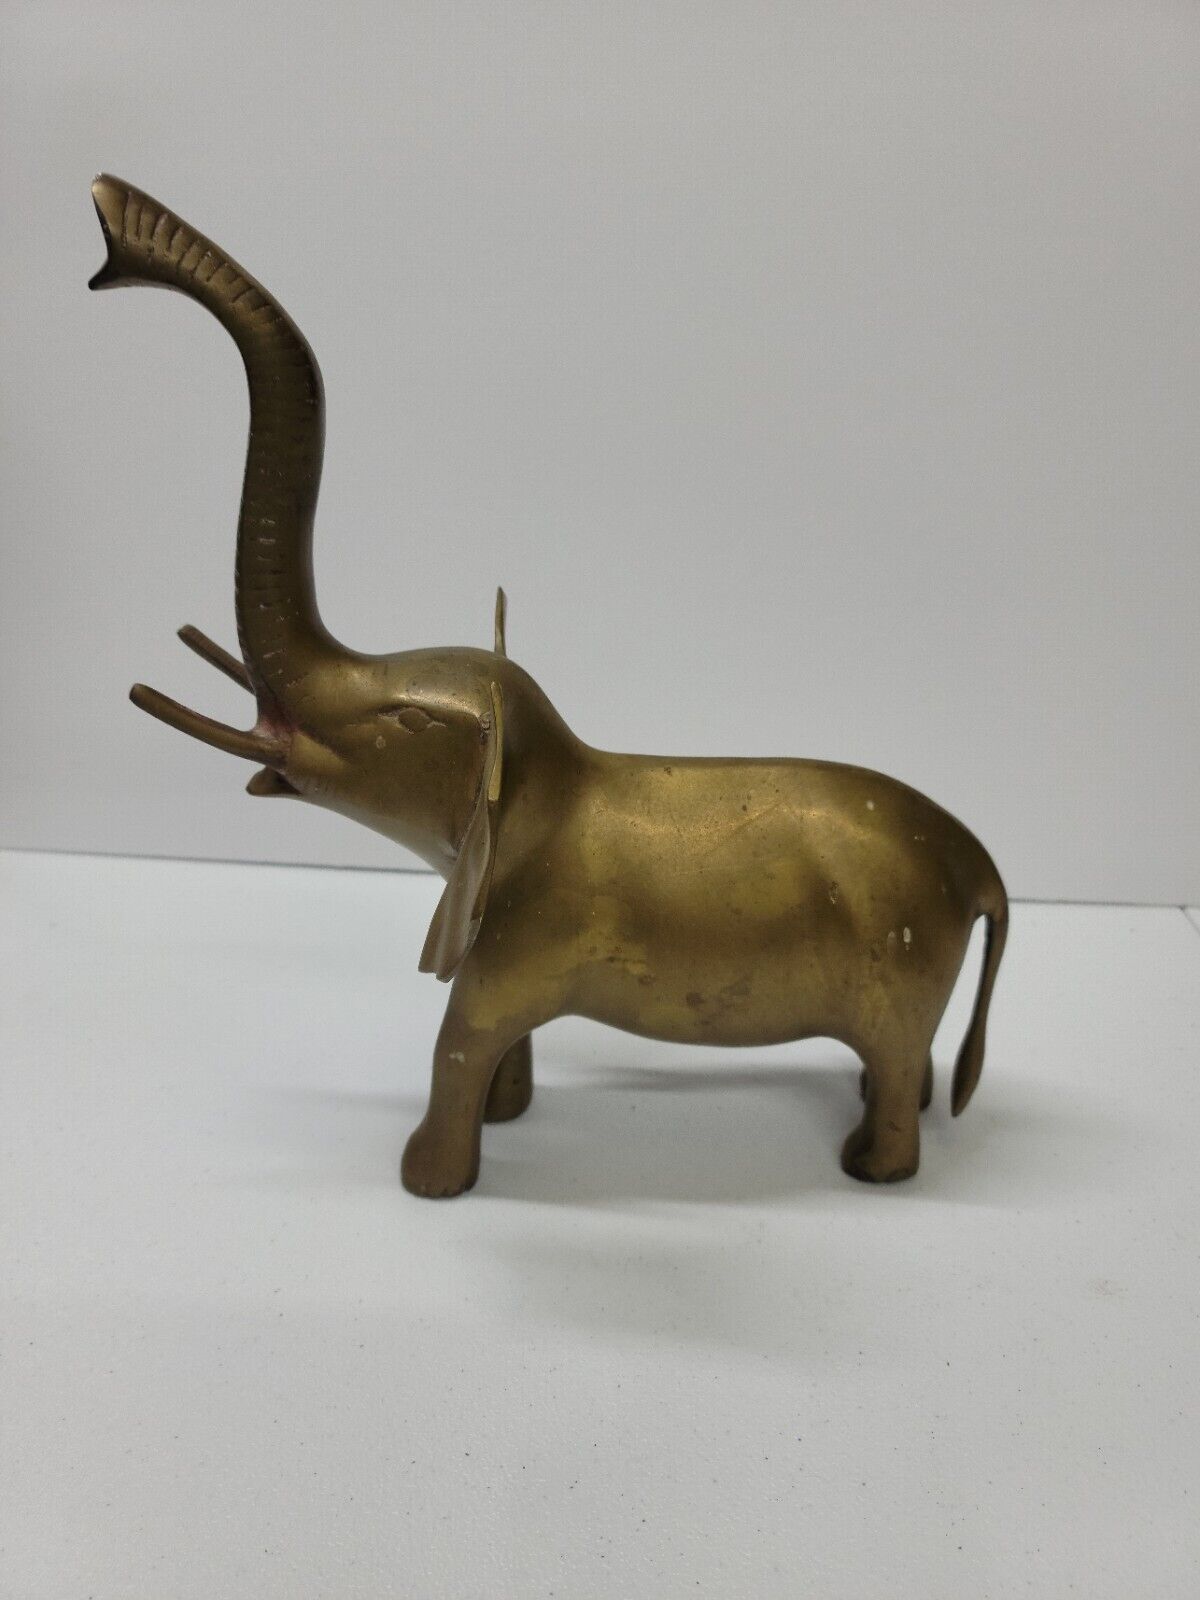 Vintage Brass Large Elephant Statue 14” tall Trunk Up.